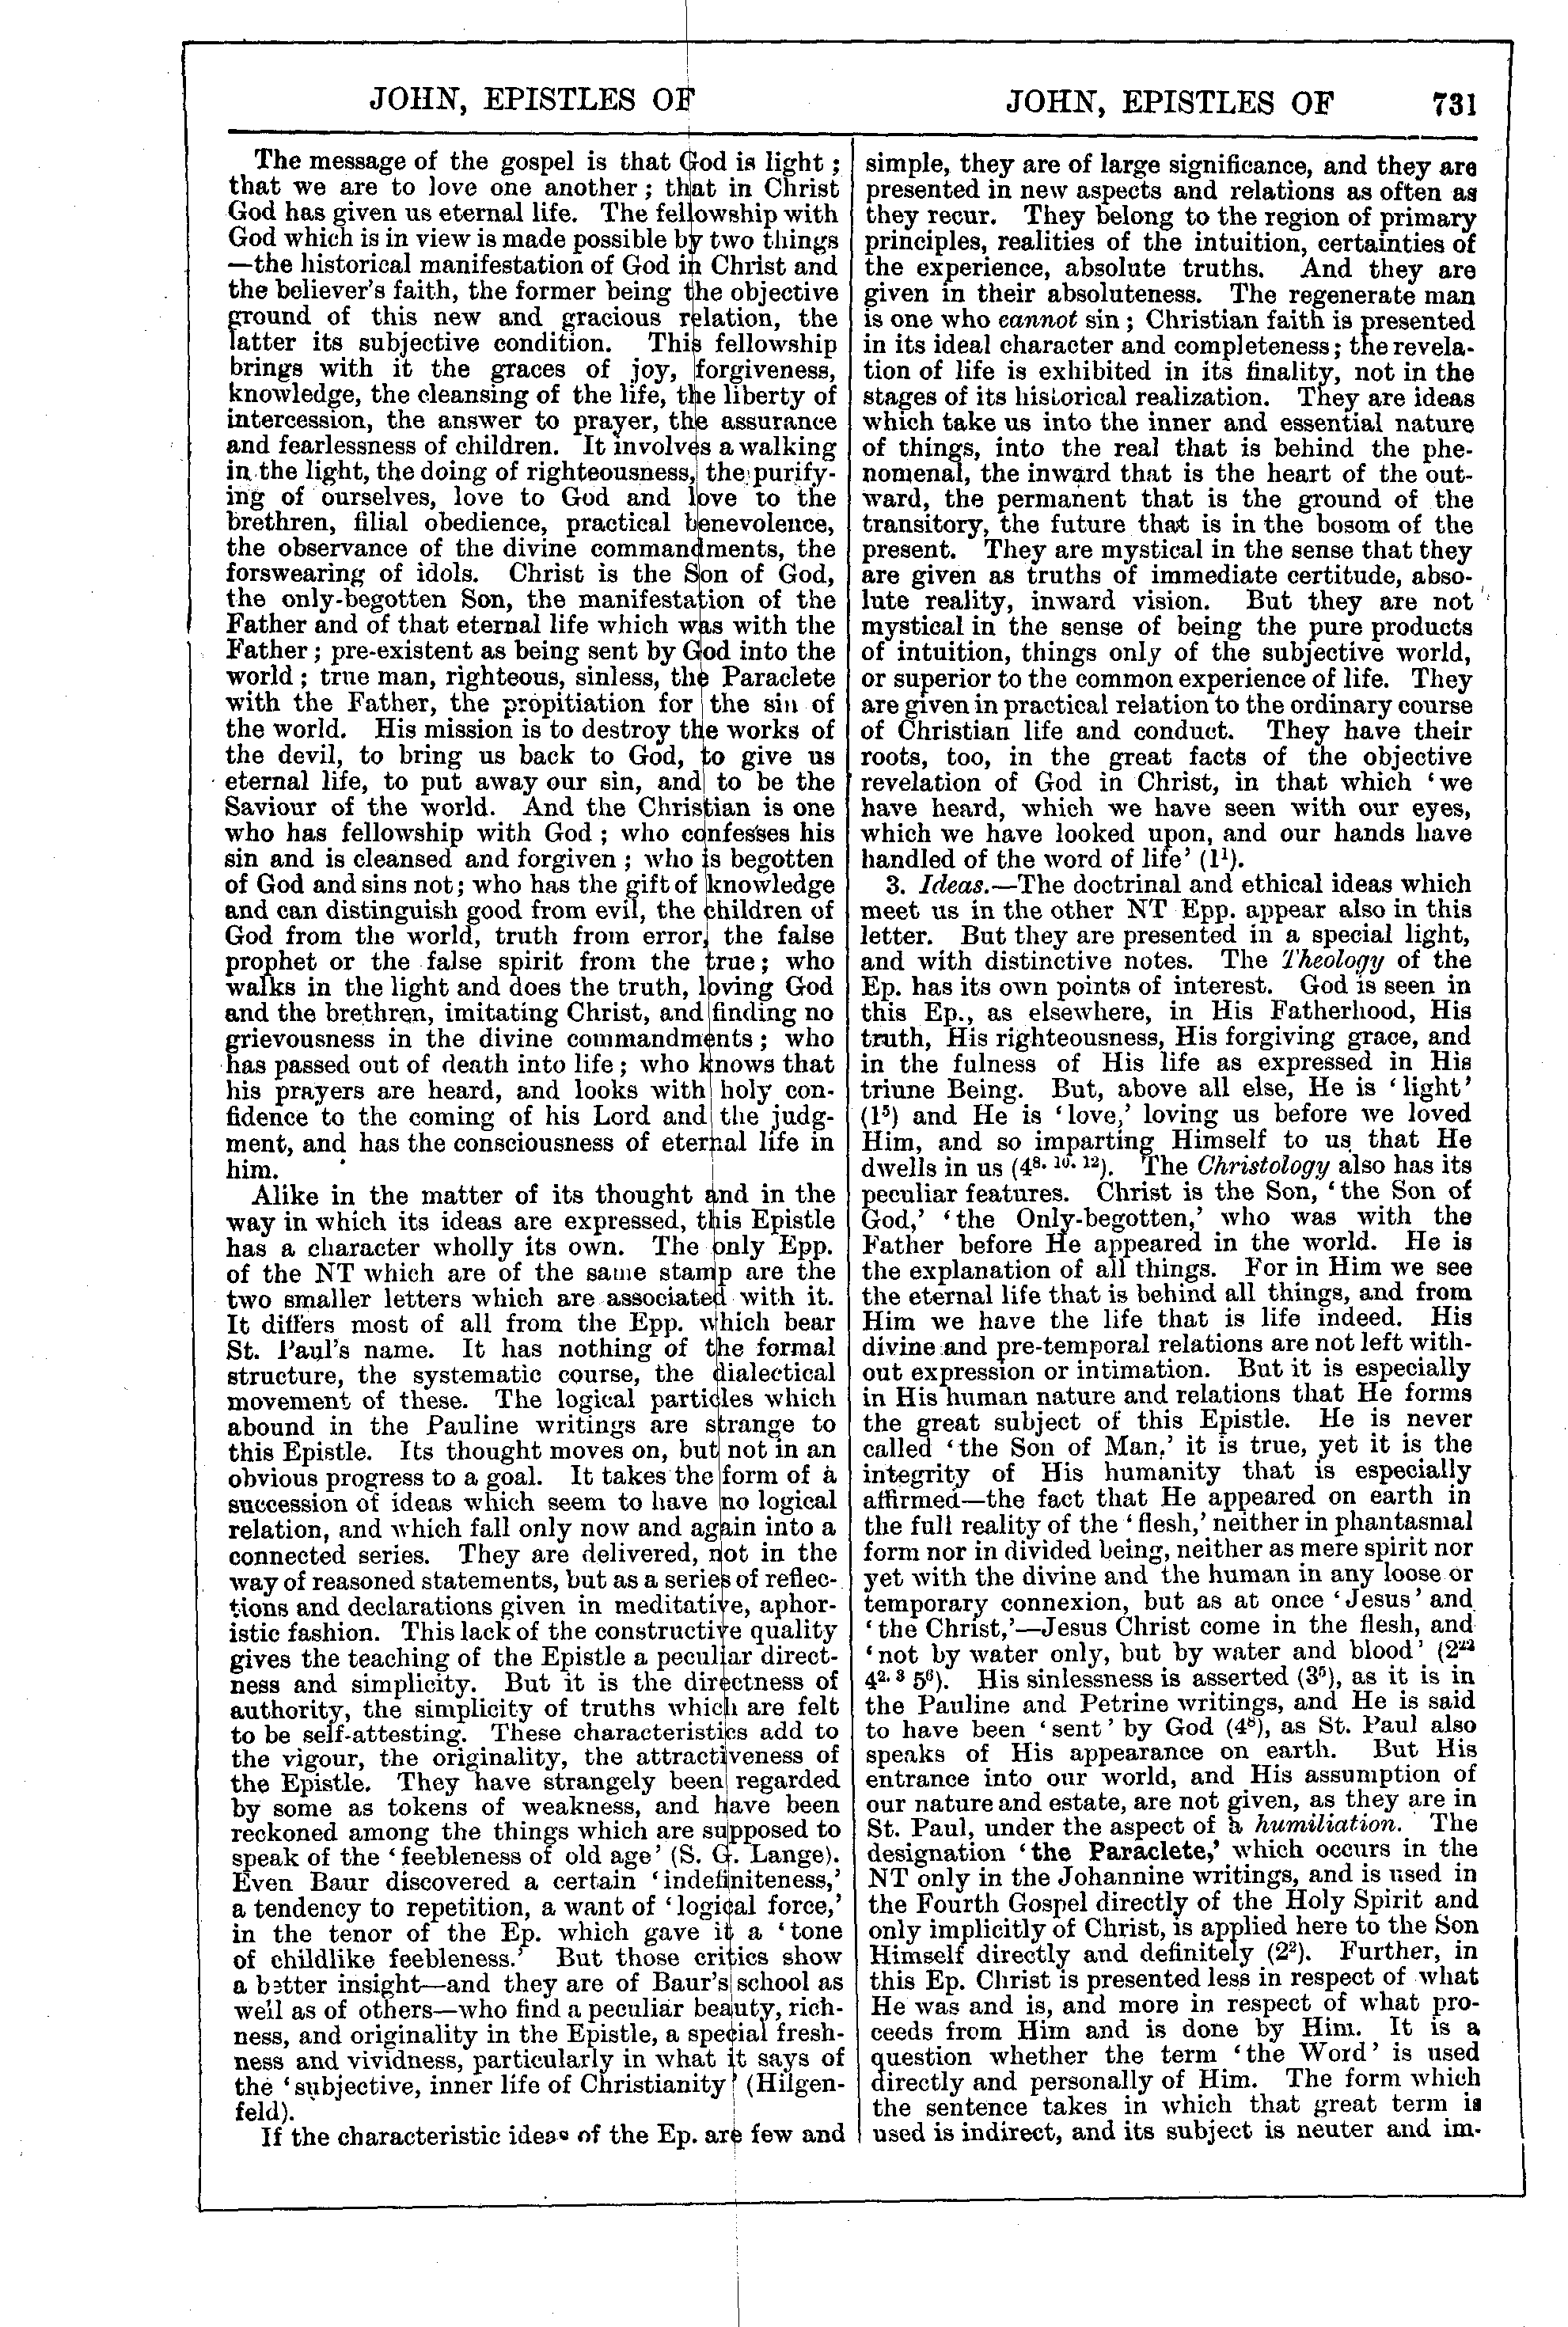 Image of page 731